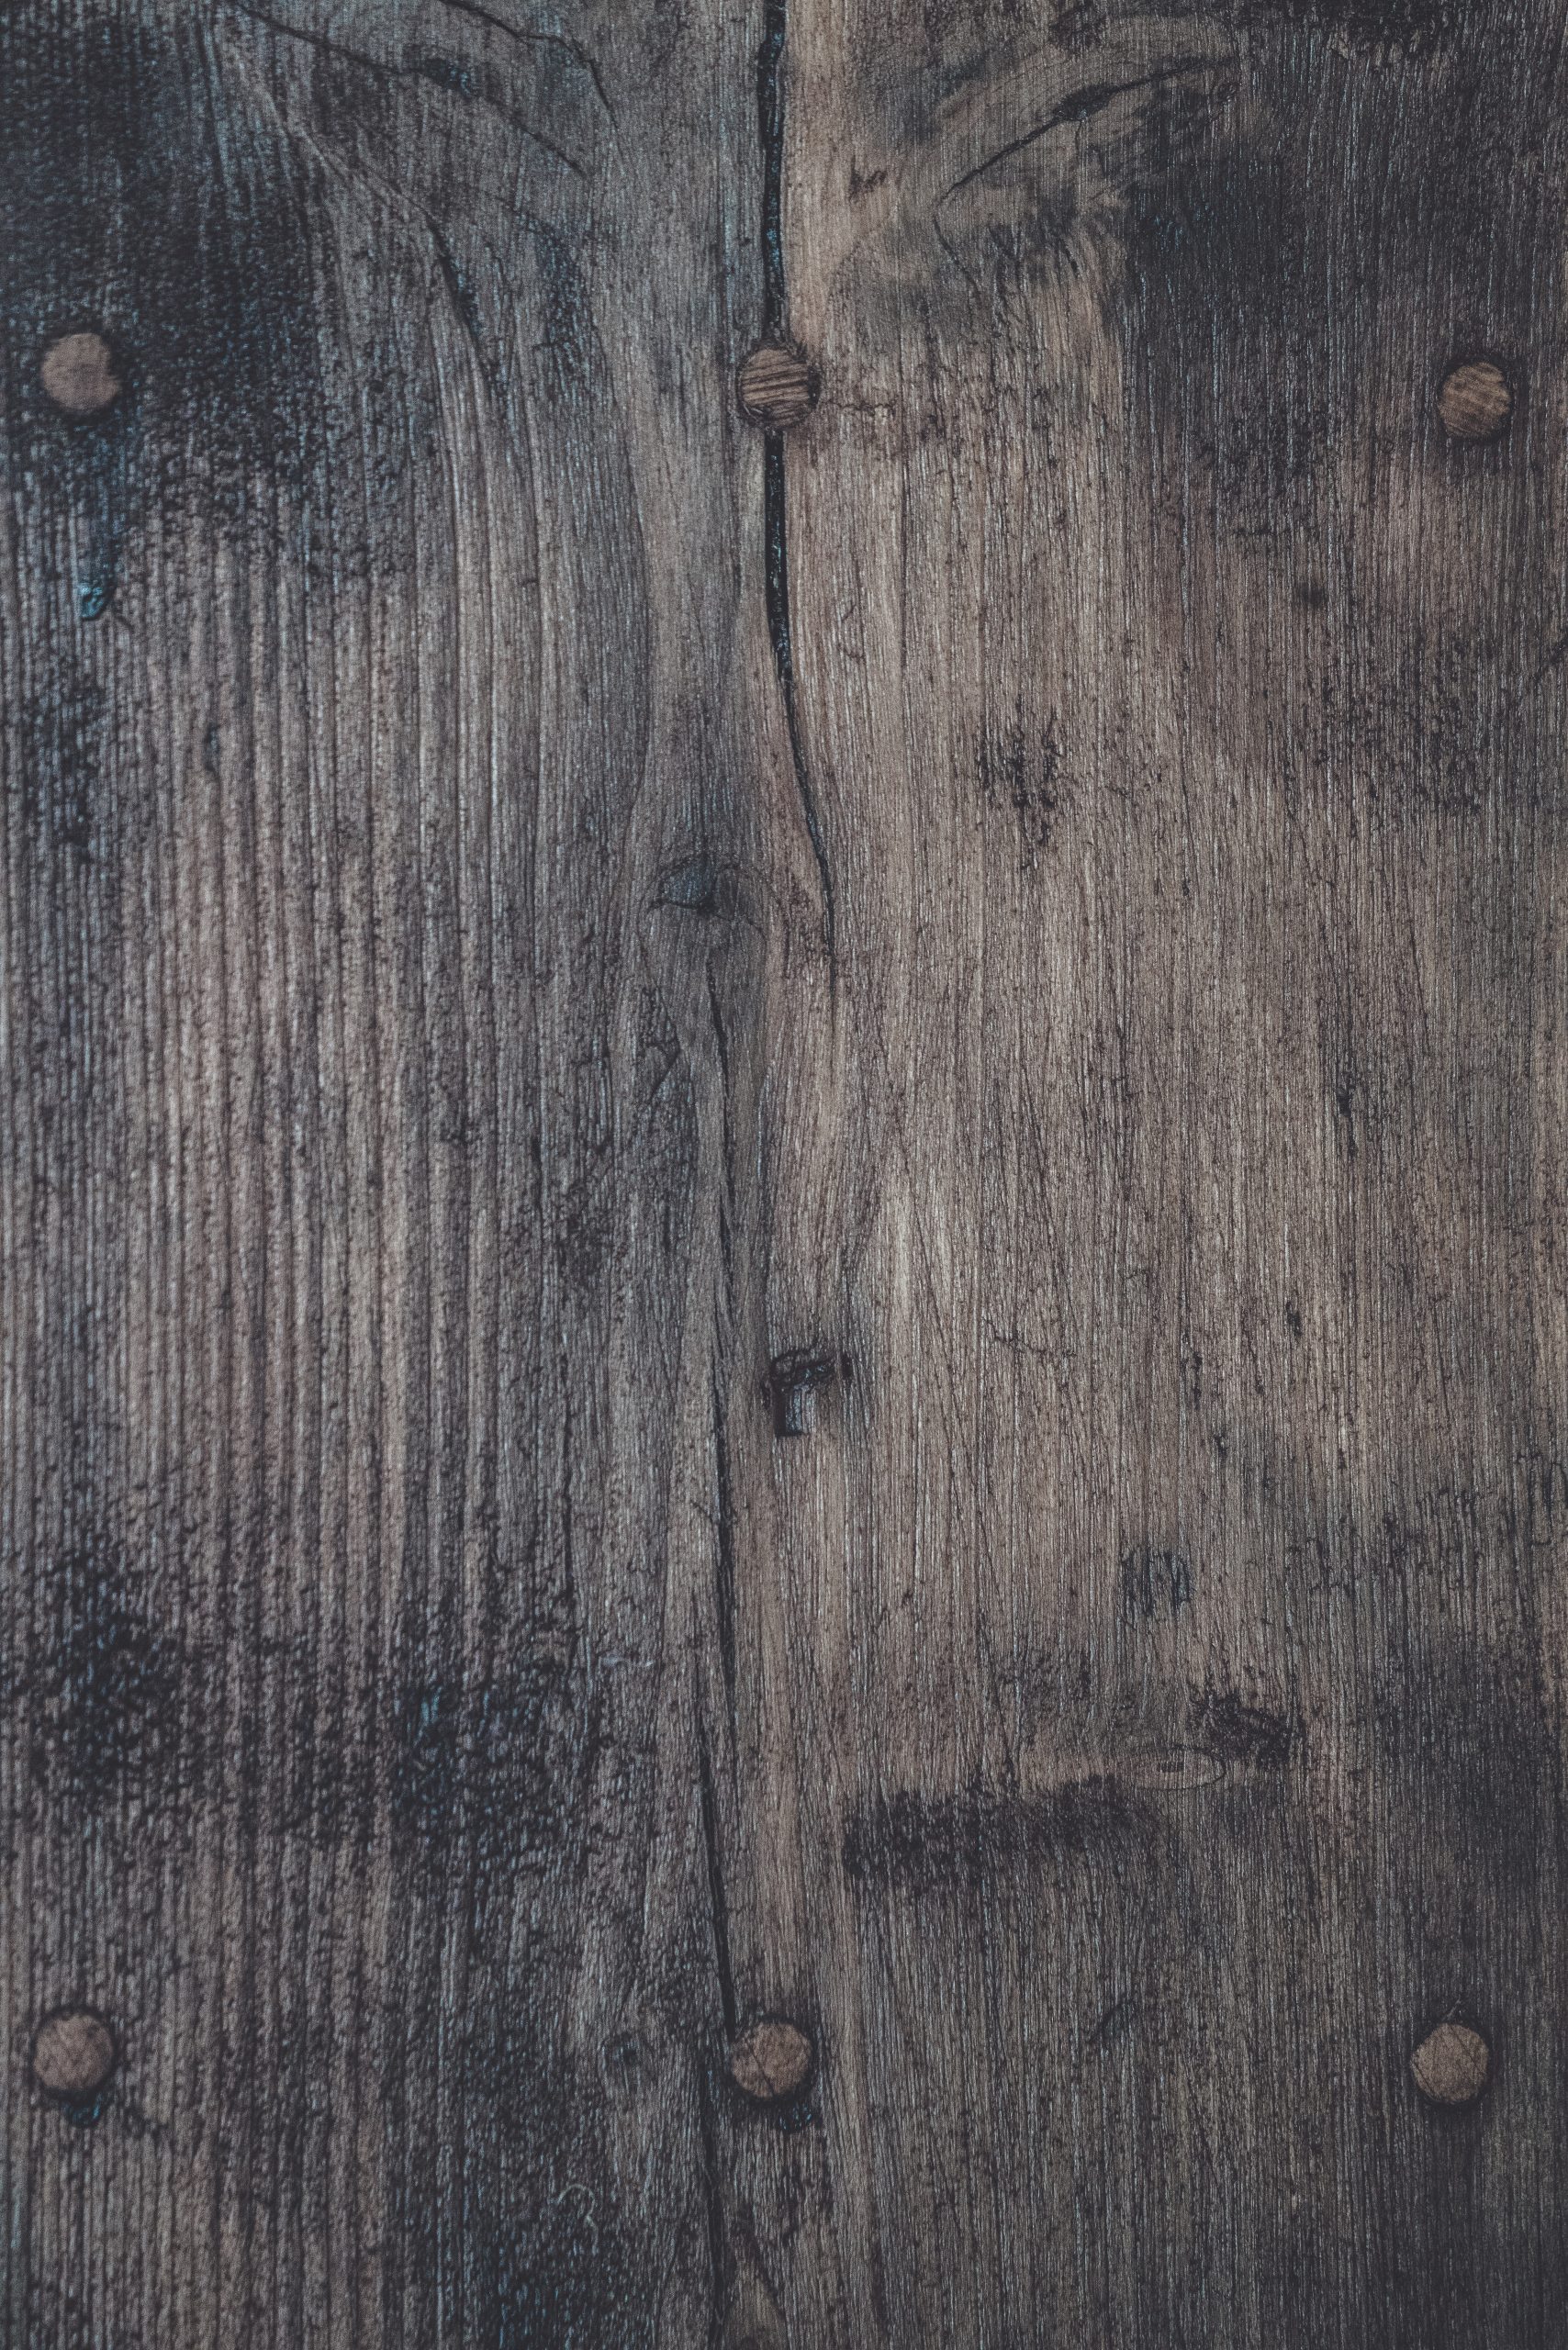 Wood Backgrounds for iPhone 3.